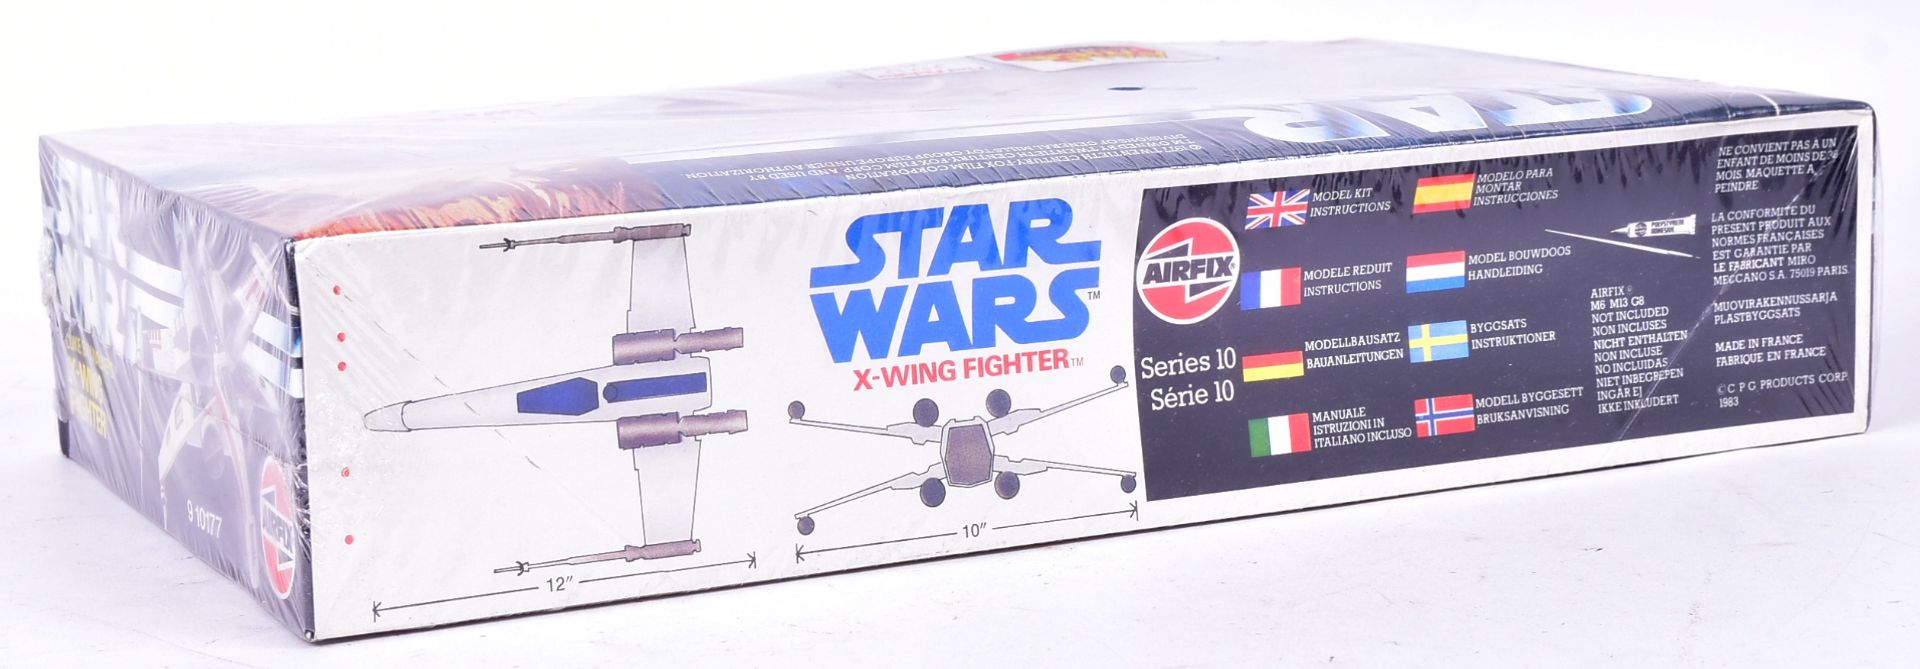 STAR WARS - VINTAGE AIRFIX FACTORY SEALED X-WING FIGHTER MODEL KIT - Image 2 of 3